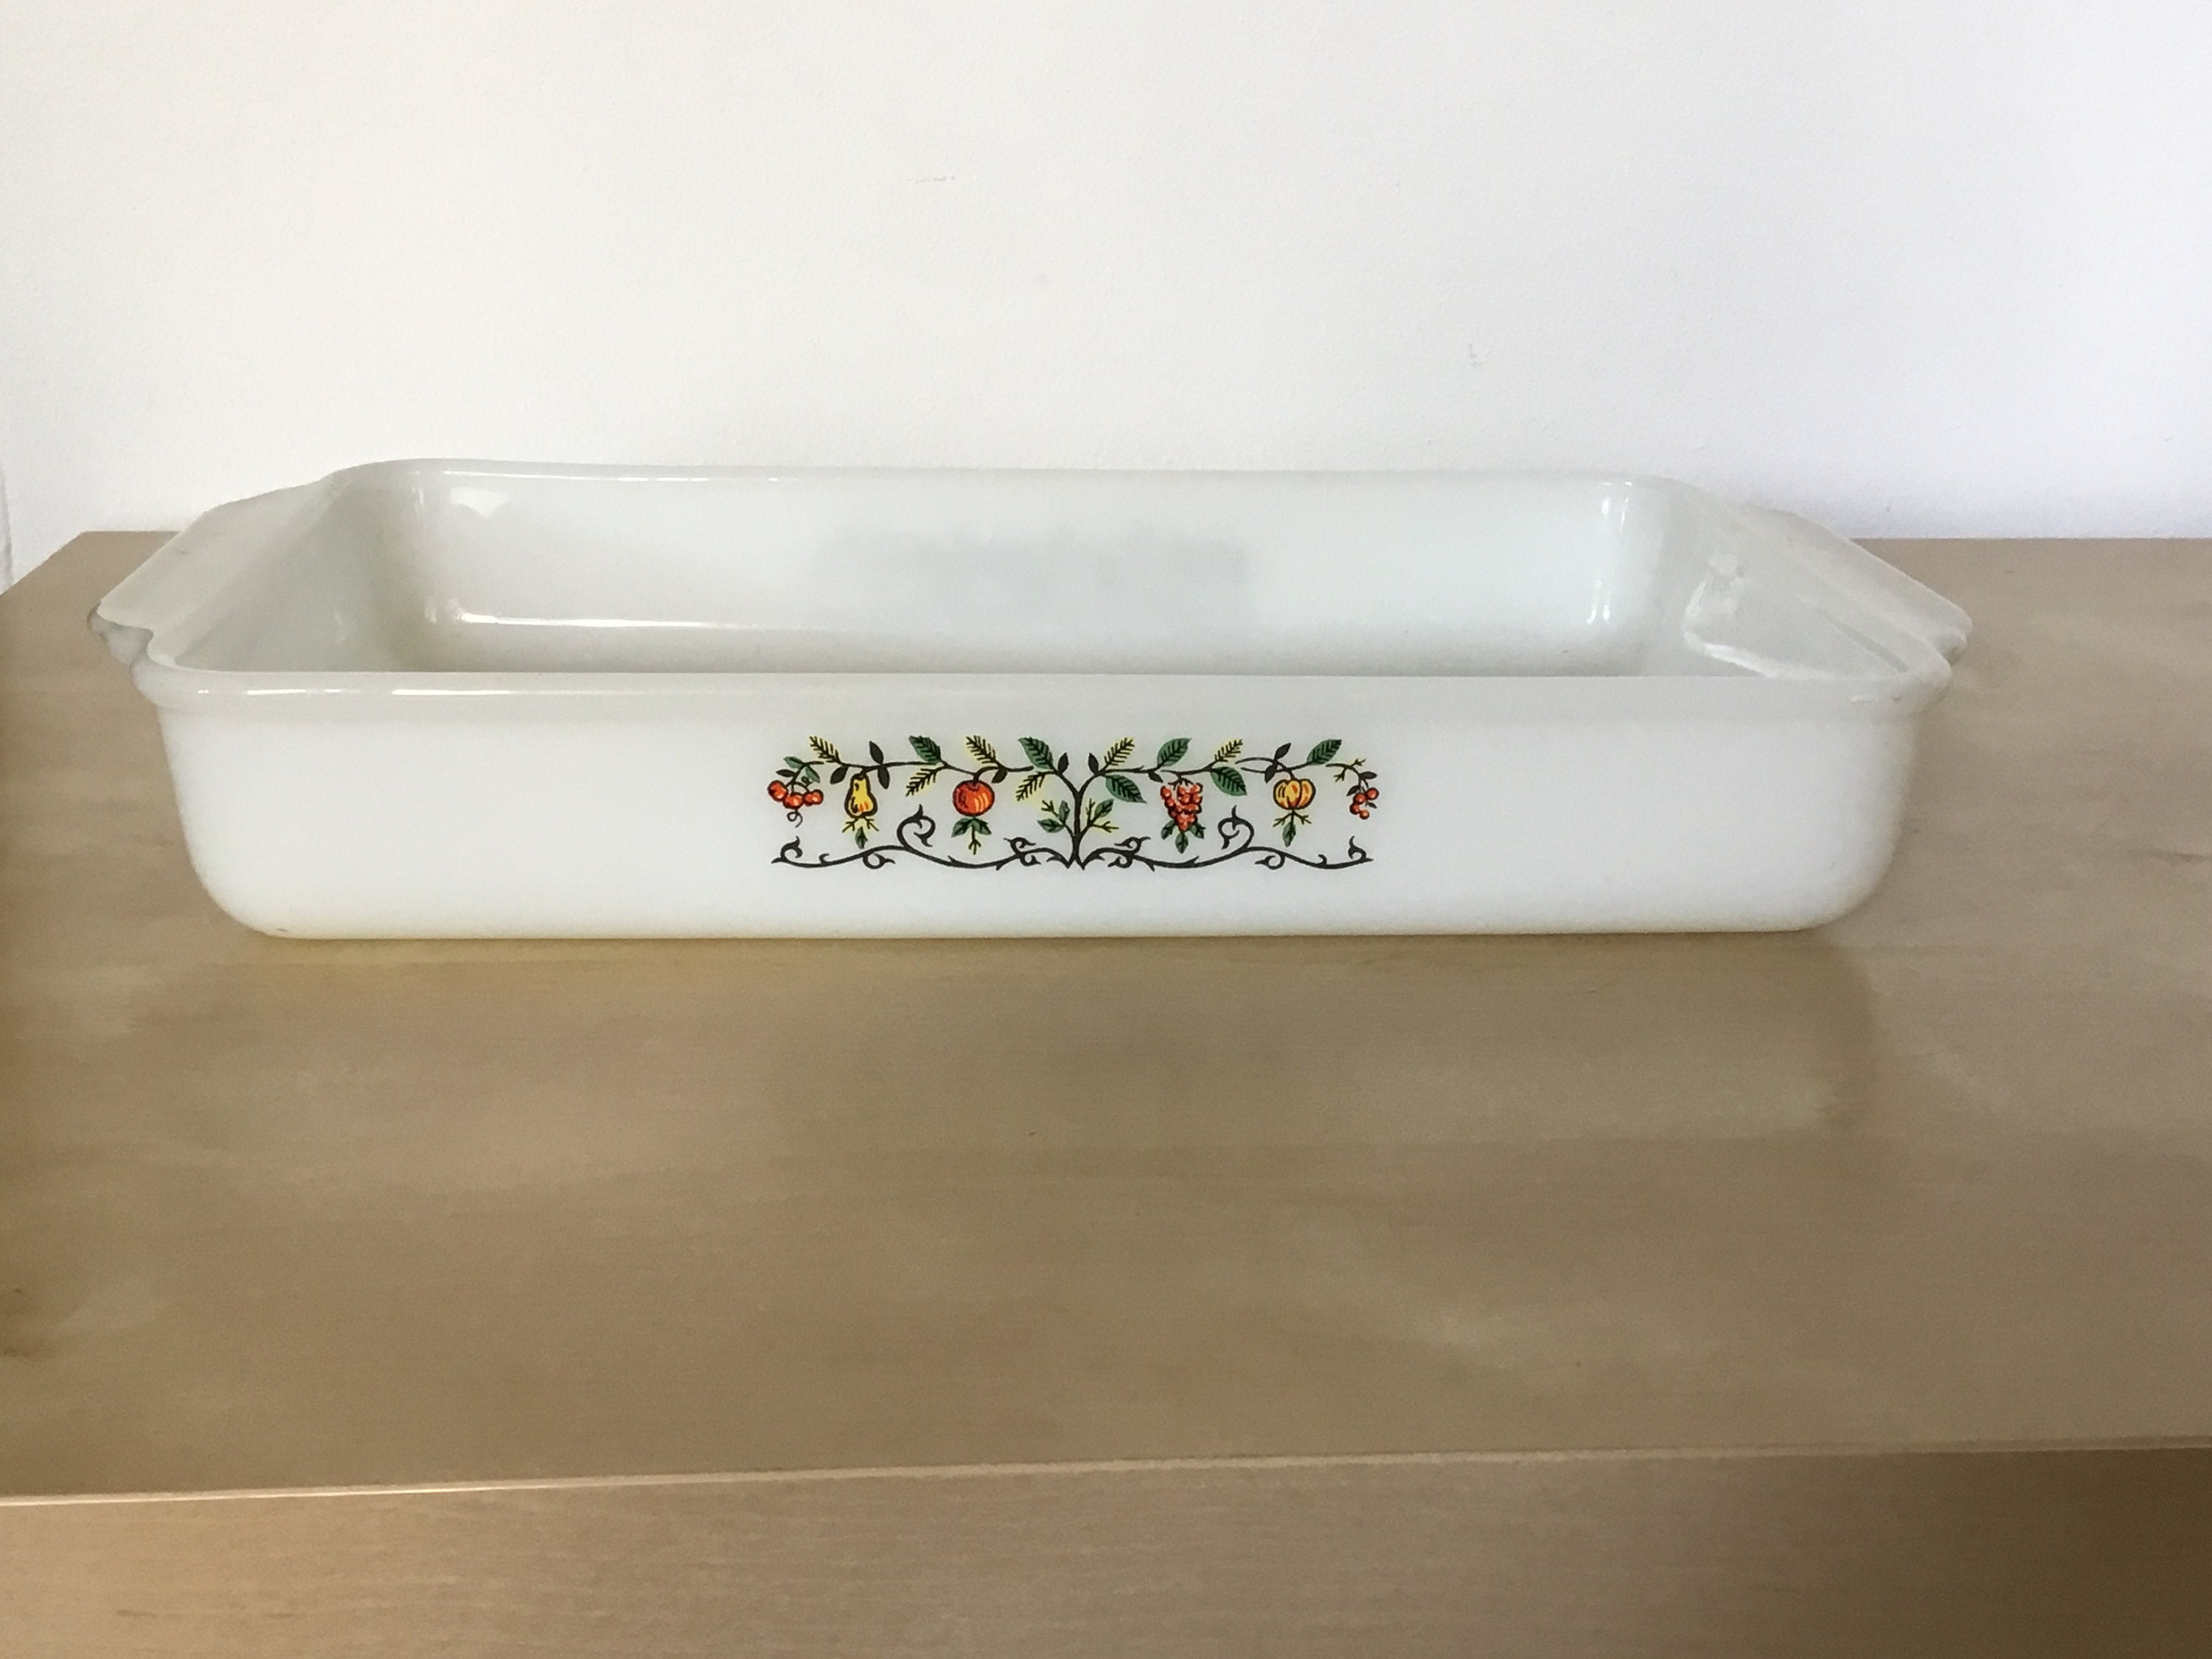 Fire King Anchor Hocking 9x13 3qt Glass Baking Dish Cooking Oven Bake 13x9